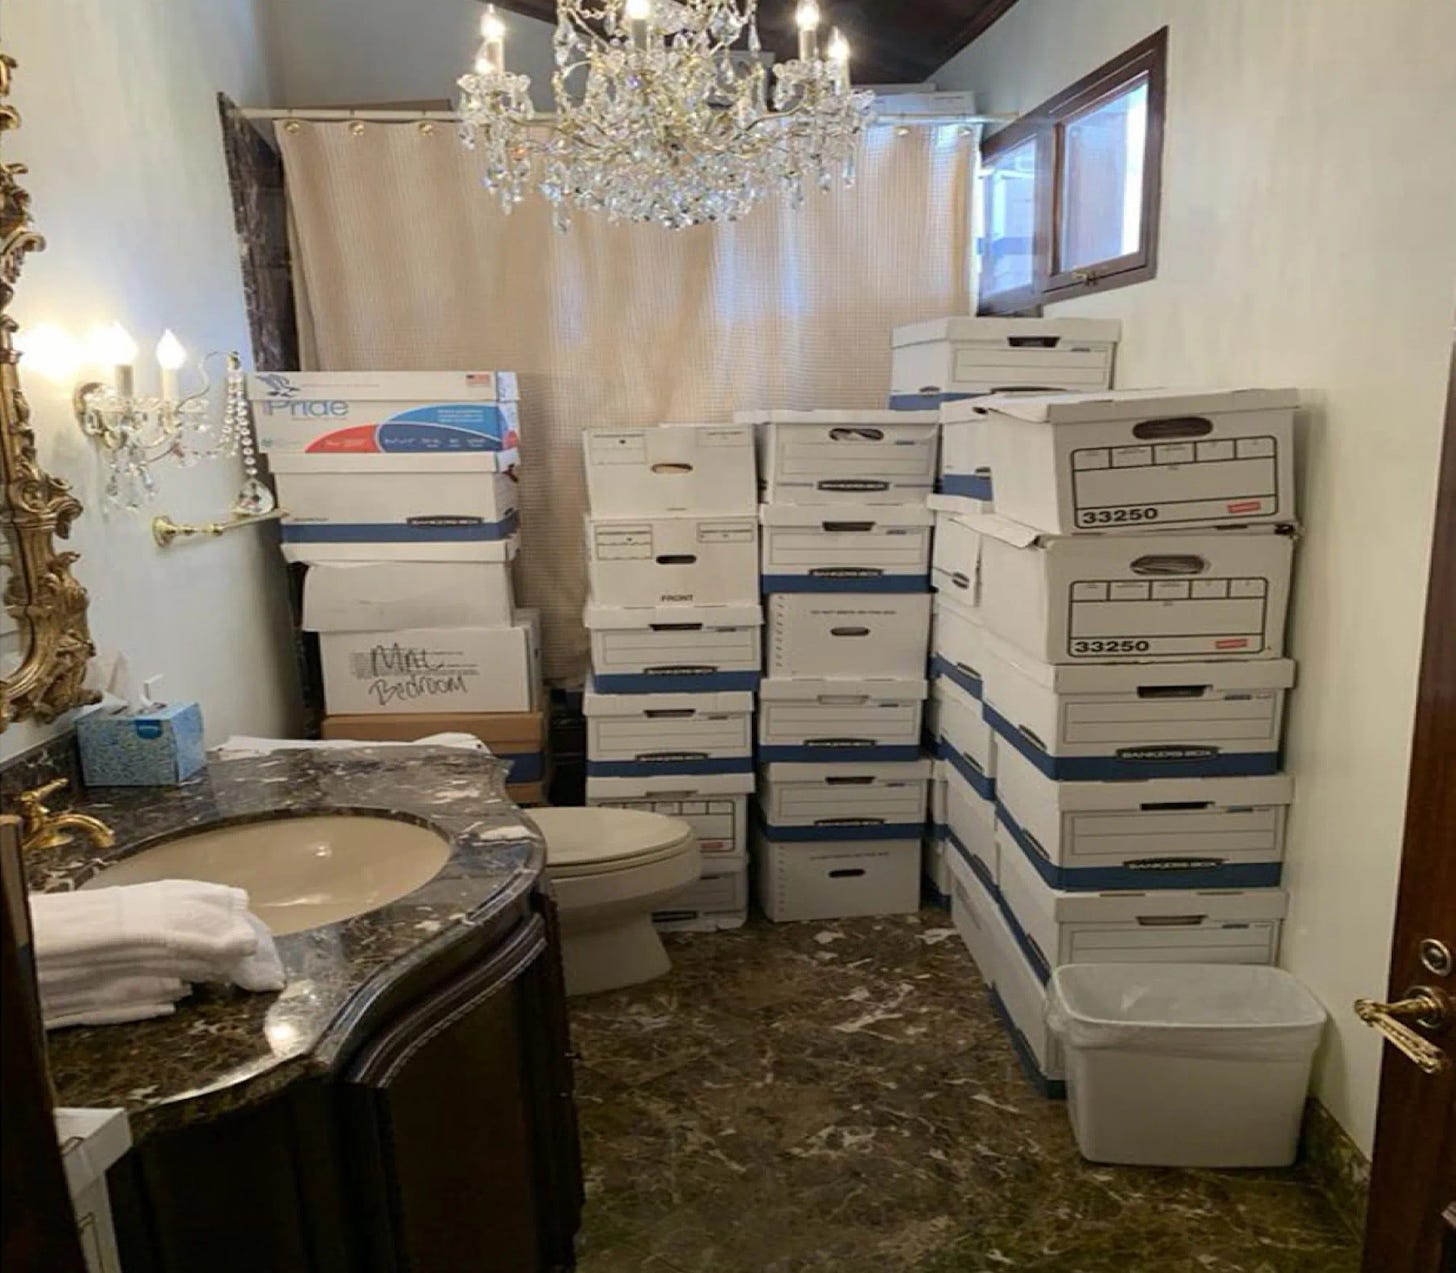 Several boxes of presumably classified documents in what looks like a hotel ballroom's bathroom.